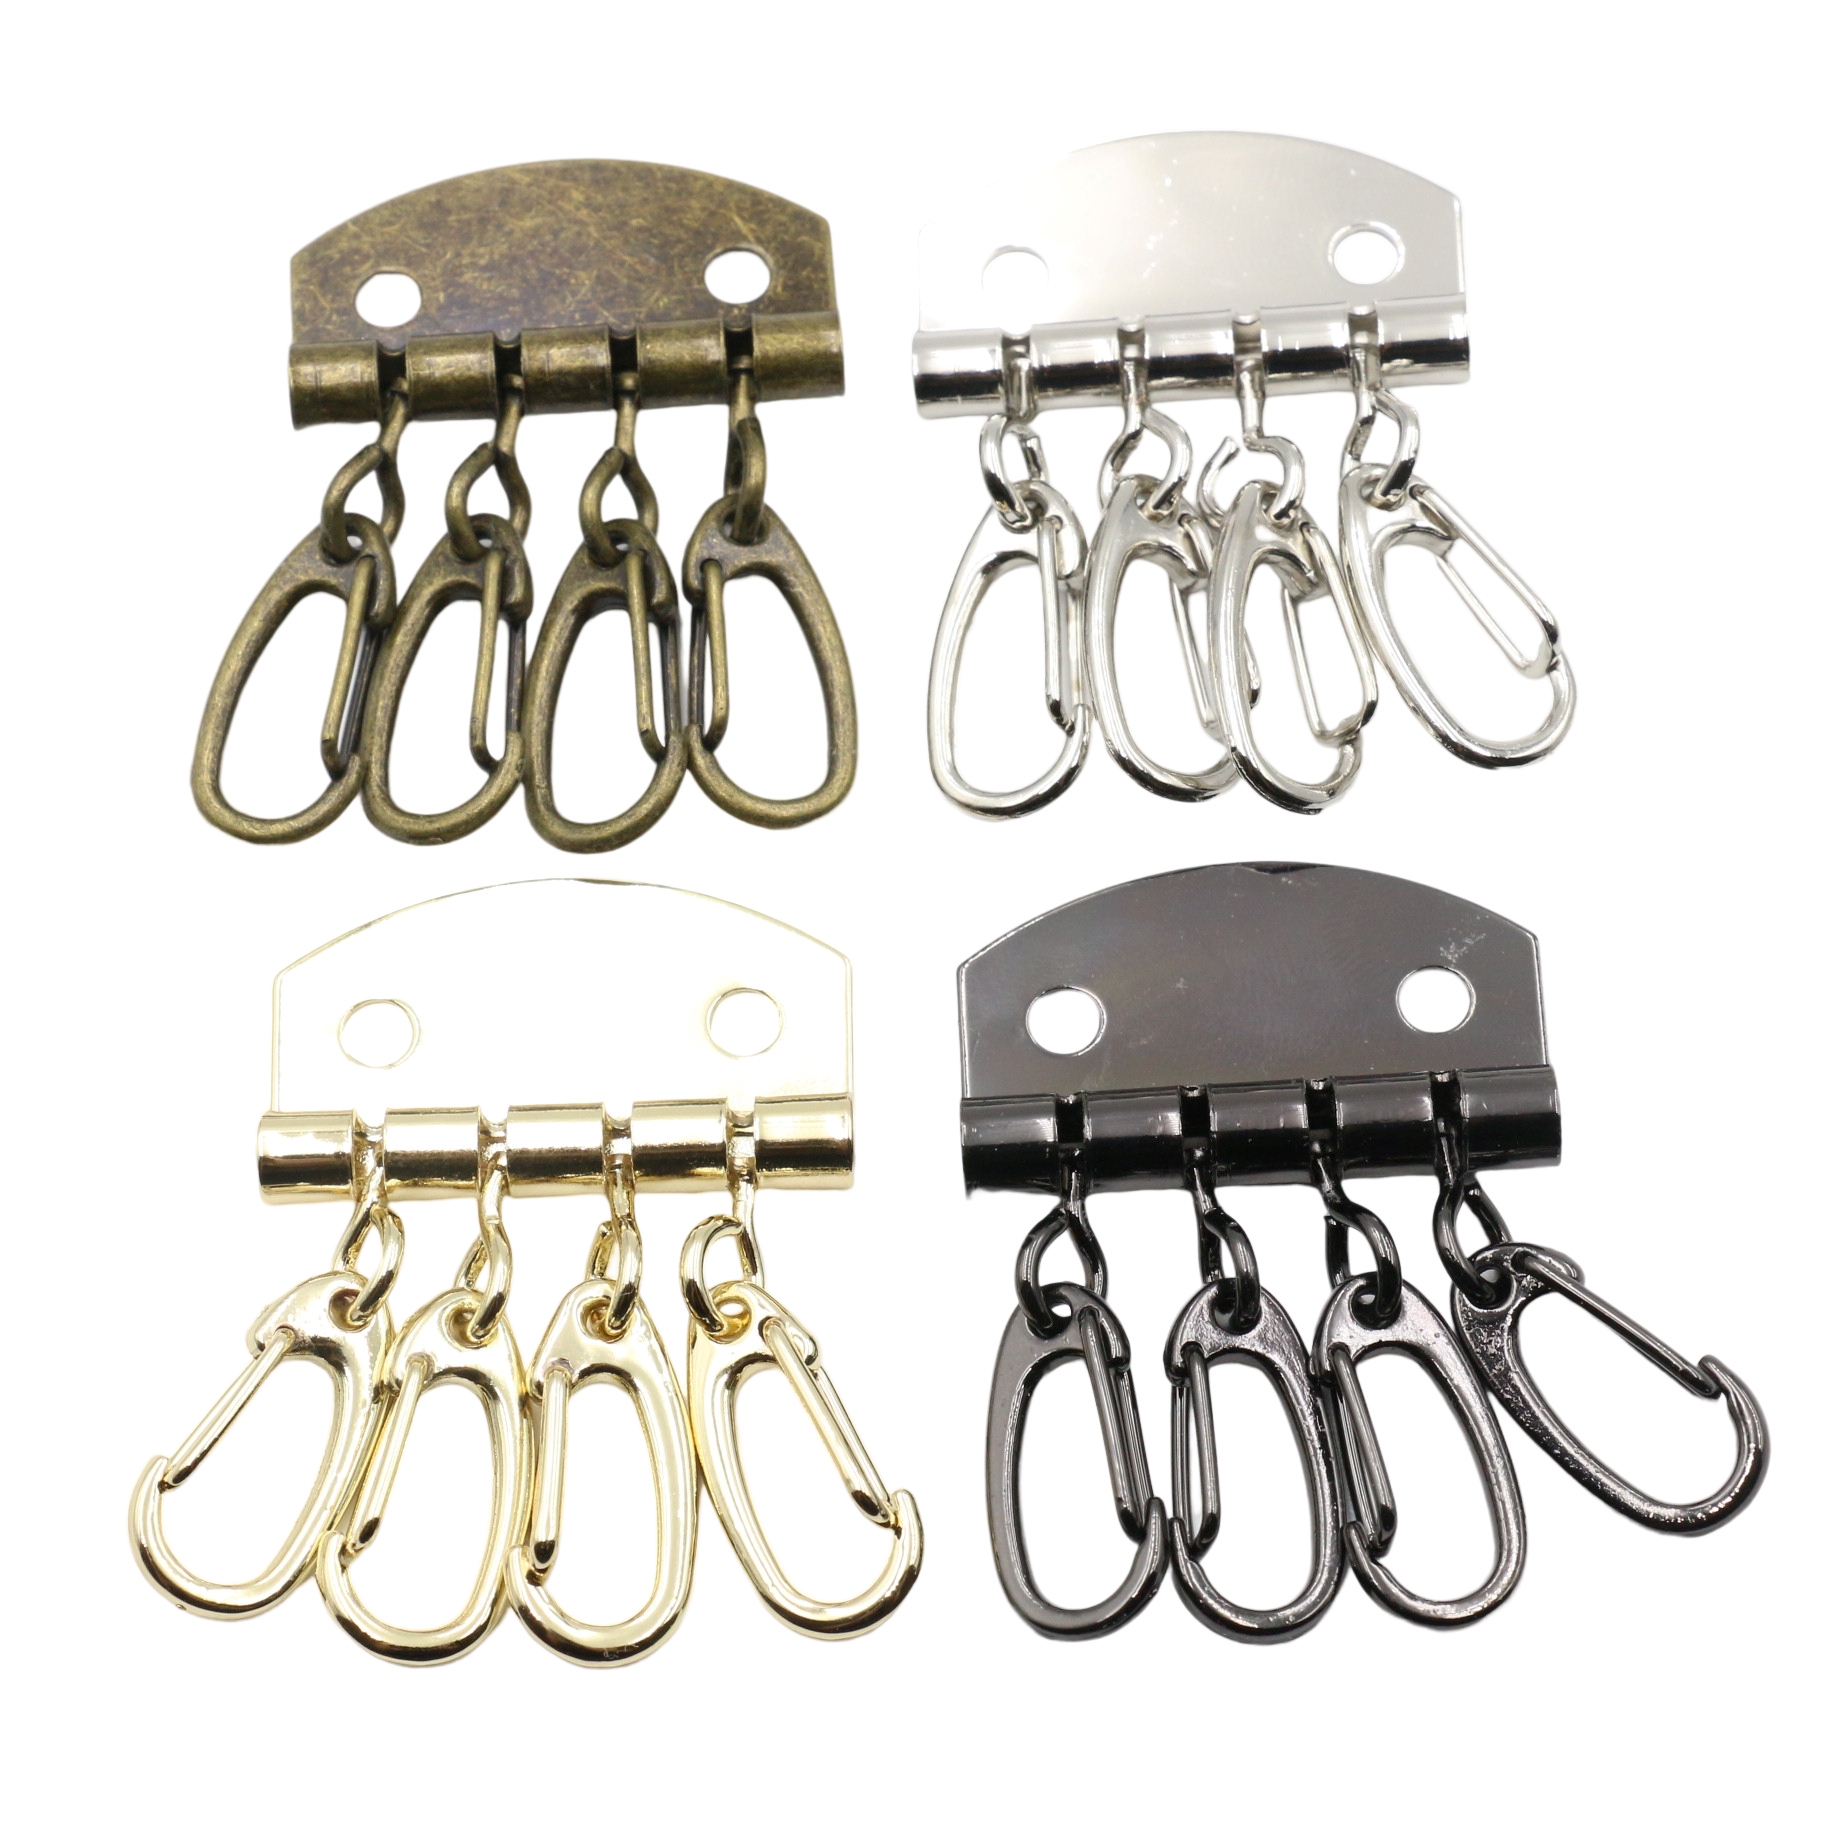 4 ream key case metal fittings calking attaching 5 collection set all 4 color key case leather craft metal fittings parts parts key holder key holder metal fittings key case for key metal fittings 